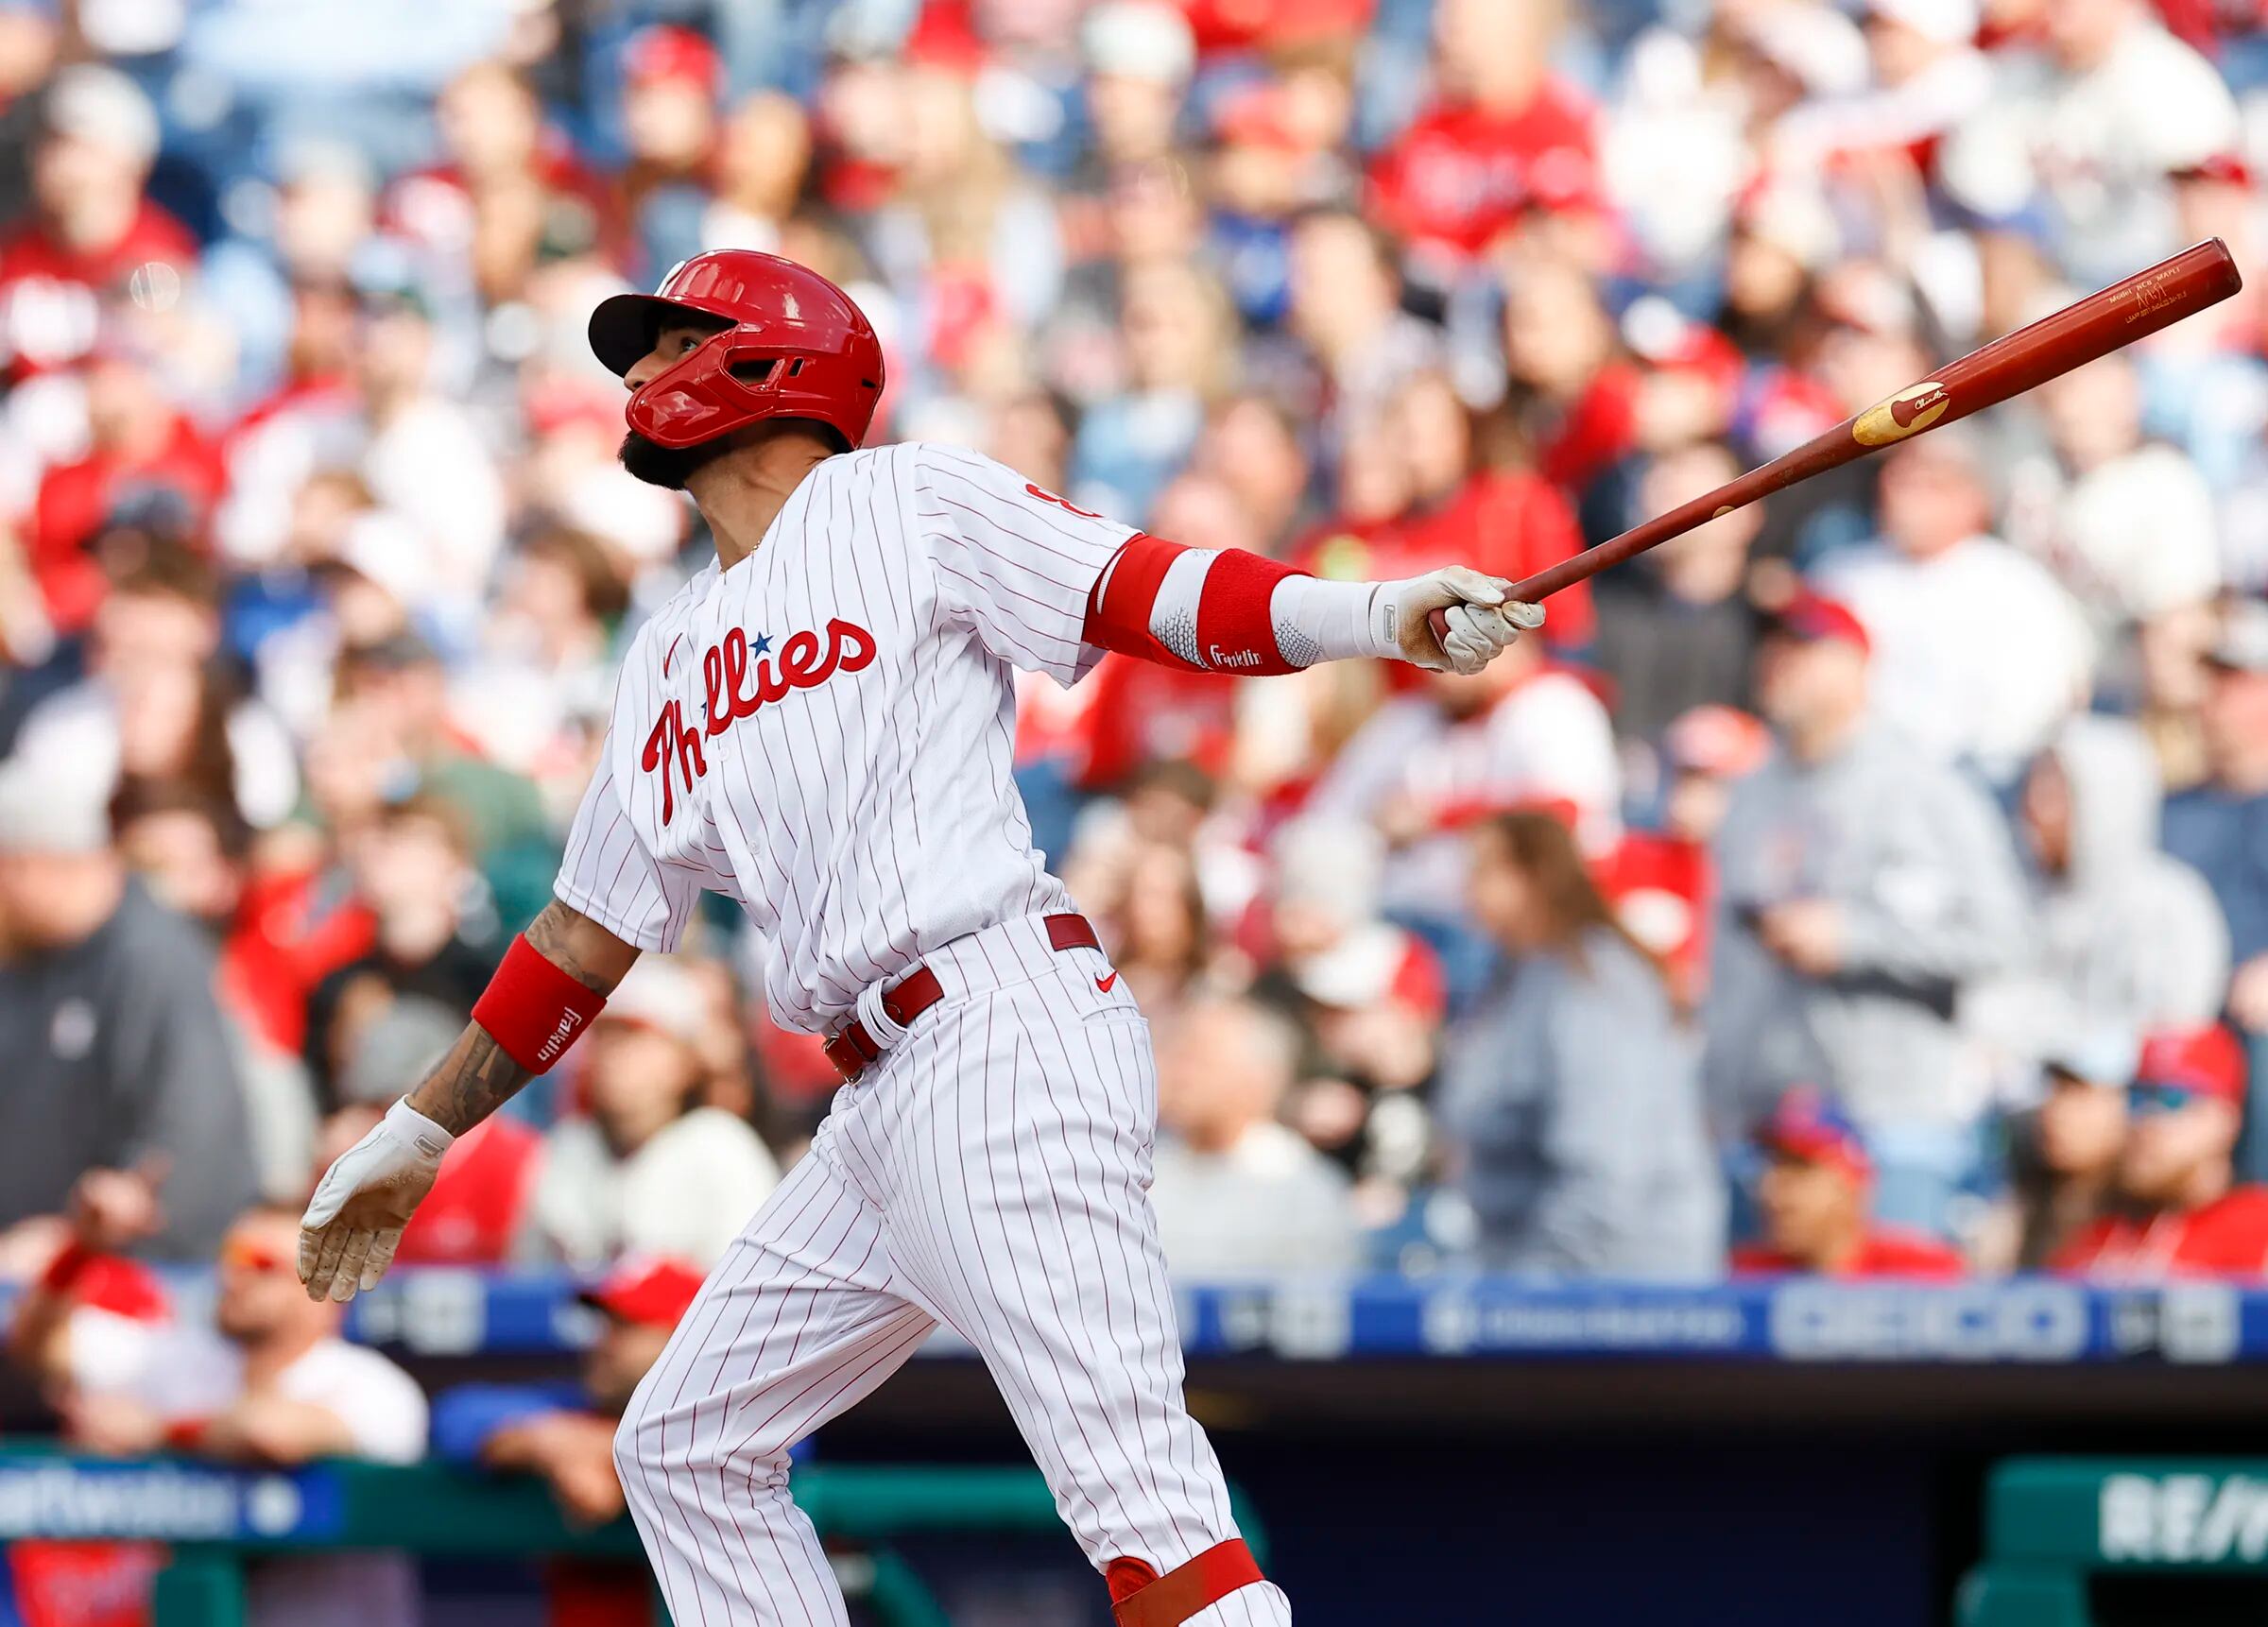 Photos from the Phillies Opening Day Win over the Athletics